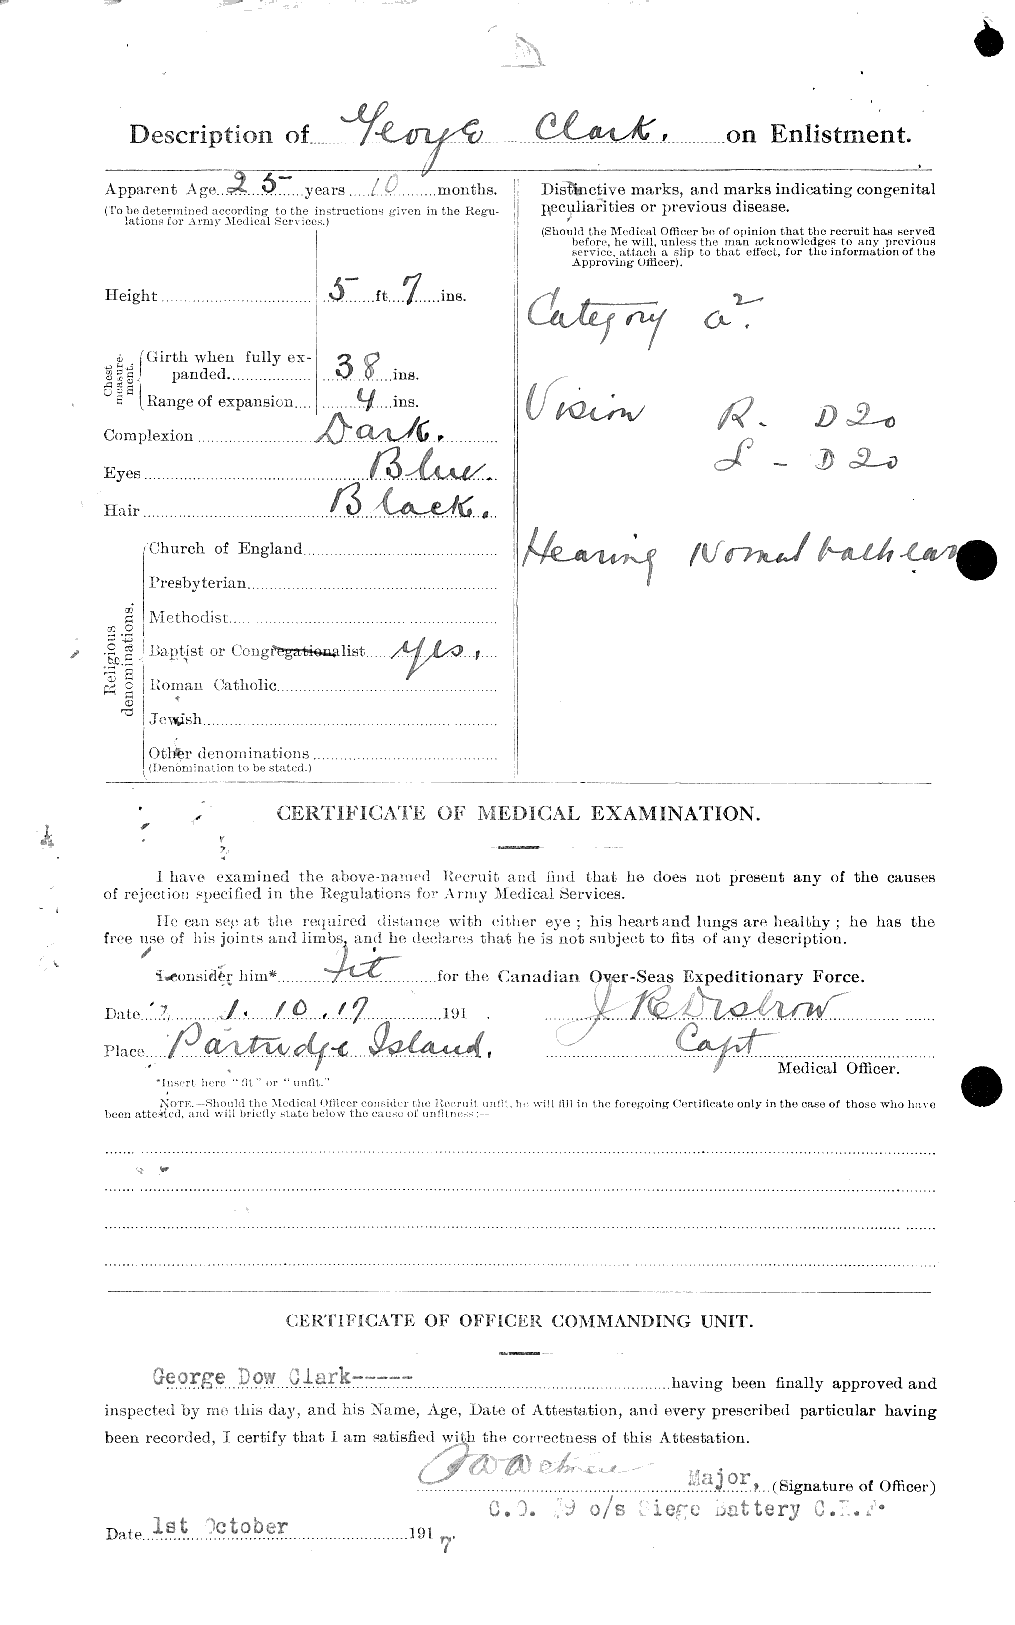 Personnel Records of the First World War - CEF 023191b